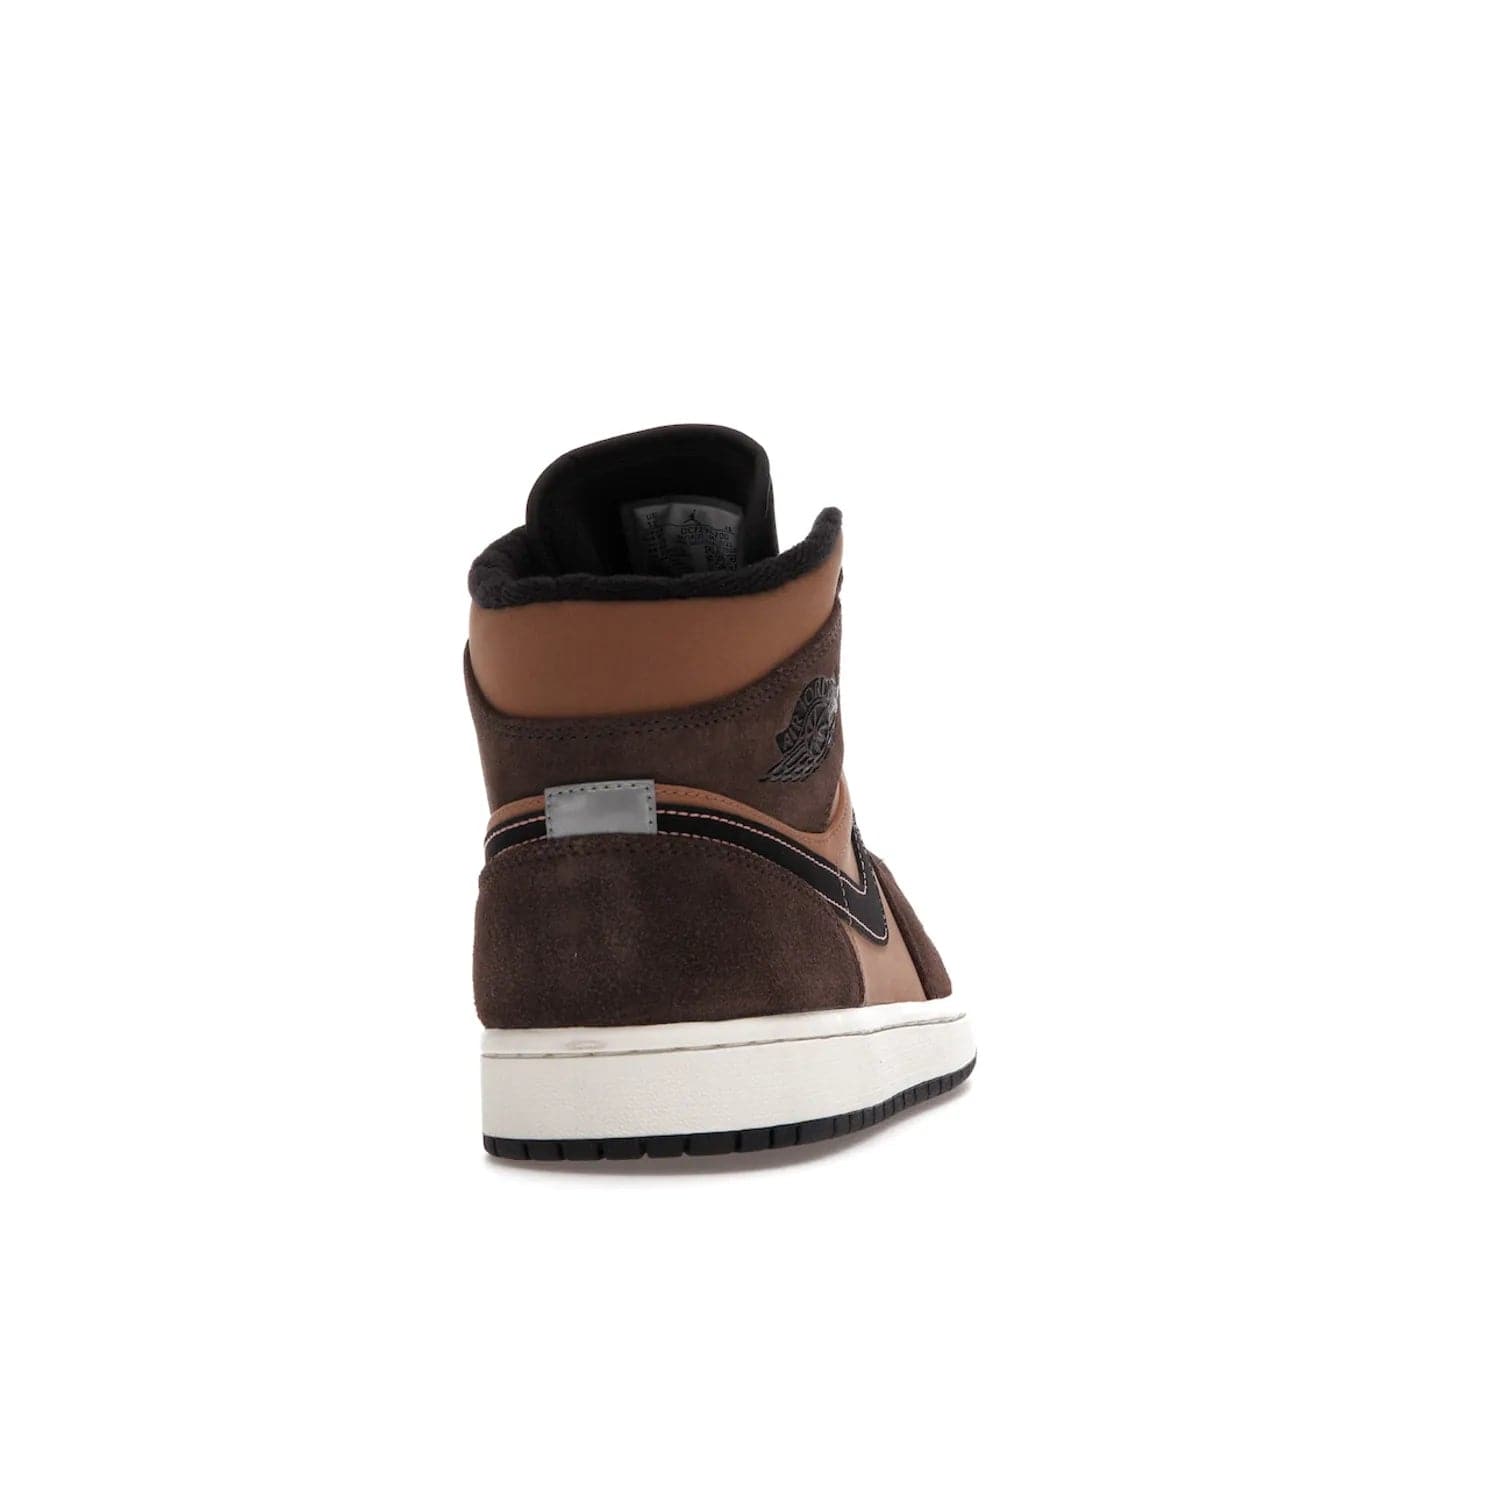 Jordan 1 Mid SE Dark Chocolate - Image 29 - Only at www.BallersClubKickz.com - This fashionable and functional Jordan 1 Mid SE Dark Chocolate features a light brown Durabuck upper, dark brown suede overlays, black Swoosh logos and reflective patch at heel. A must-have for any sneakerhead!